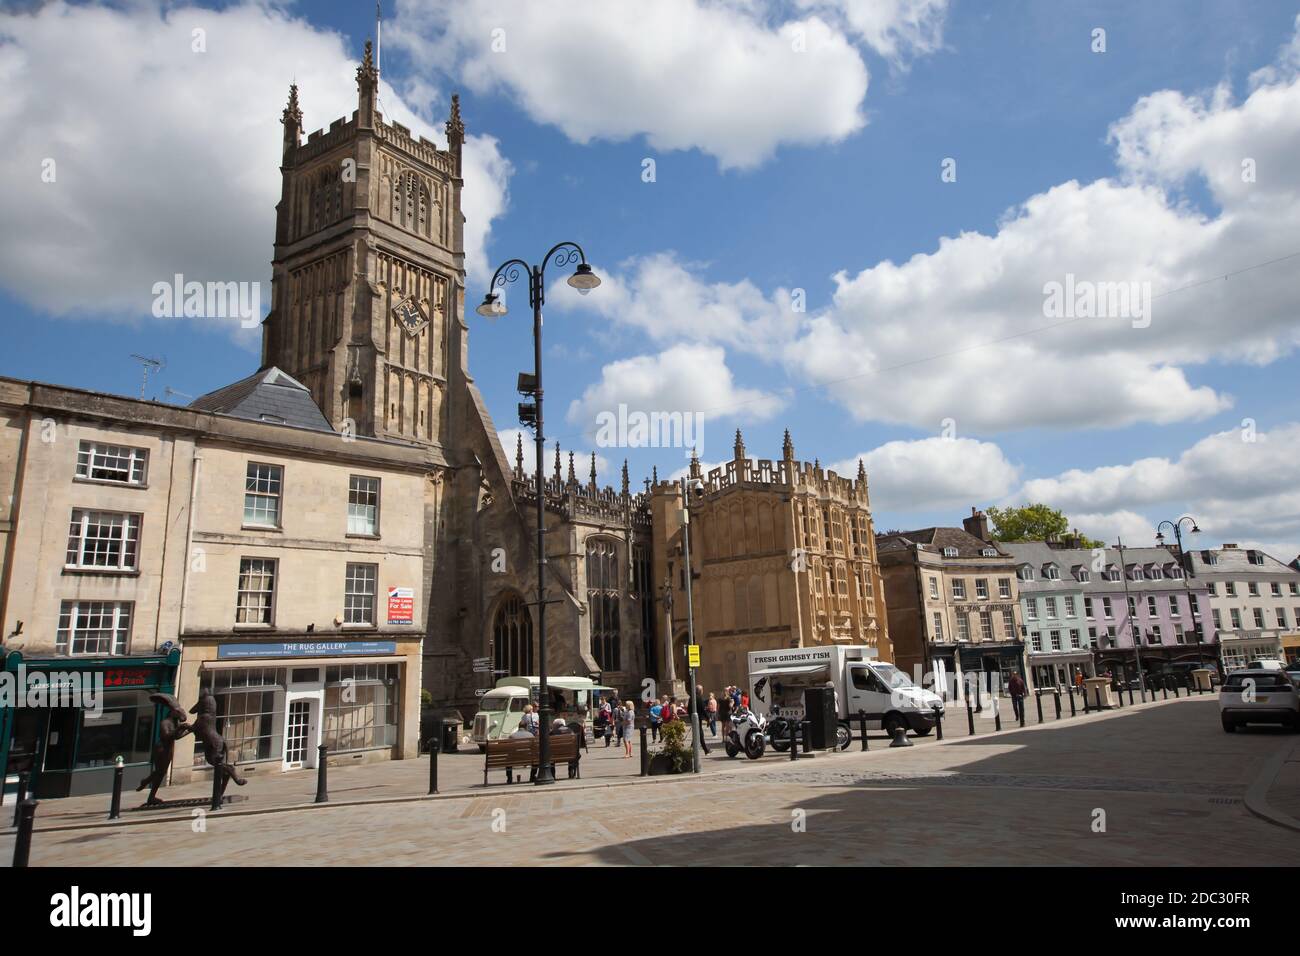 Cirencester, Gloucestershire, UK 05 15 2020 Views of Cirencester town centre in Gloucestershire, UK Stock Photo